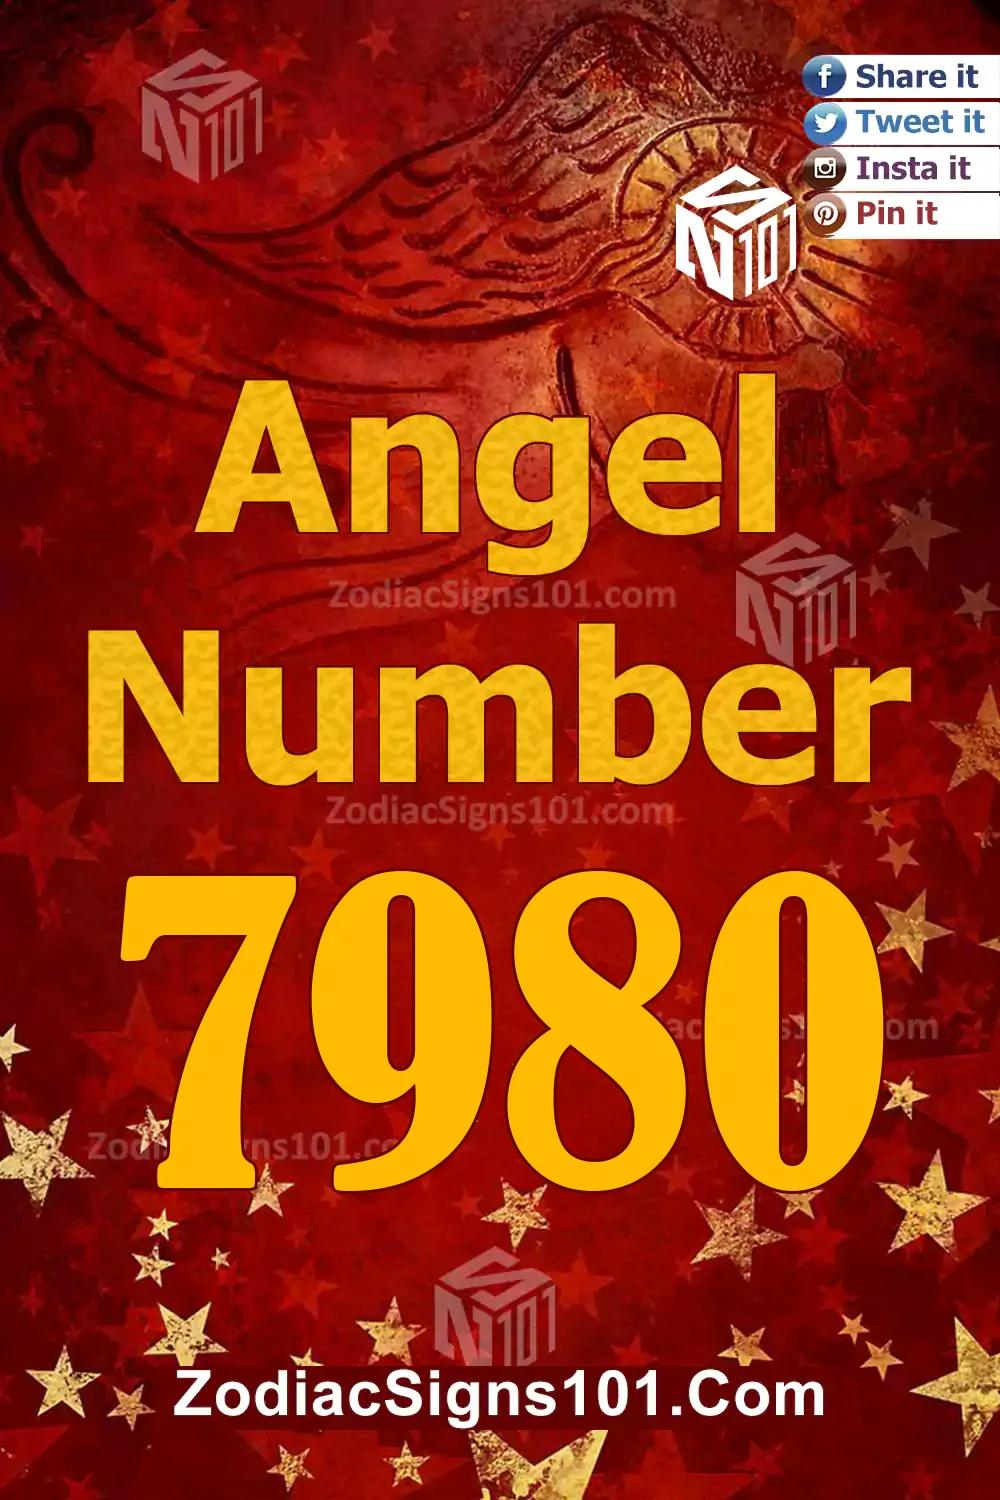 7980 Angel Number Meaning